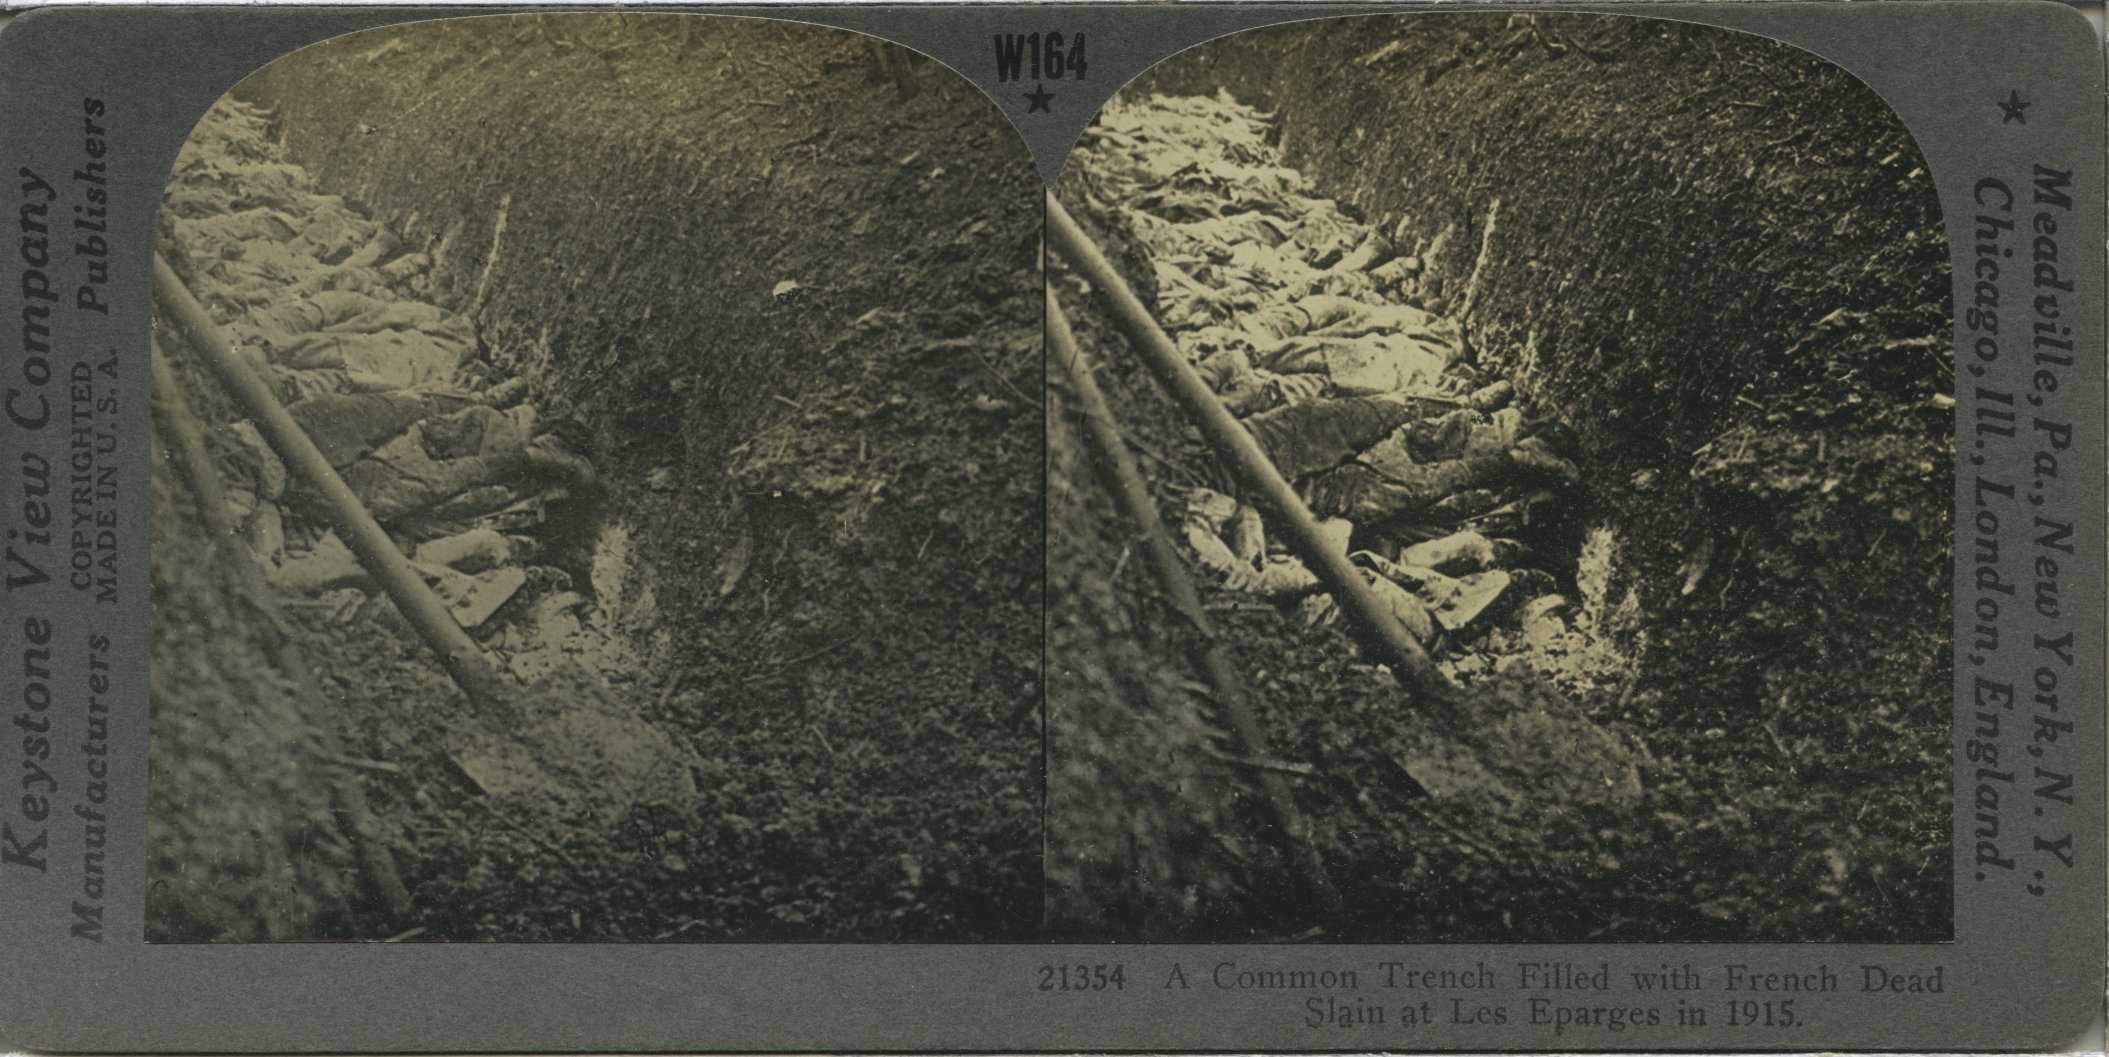 A Common Trench Filled with French Dead Slain at Les Eparges in 1915